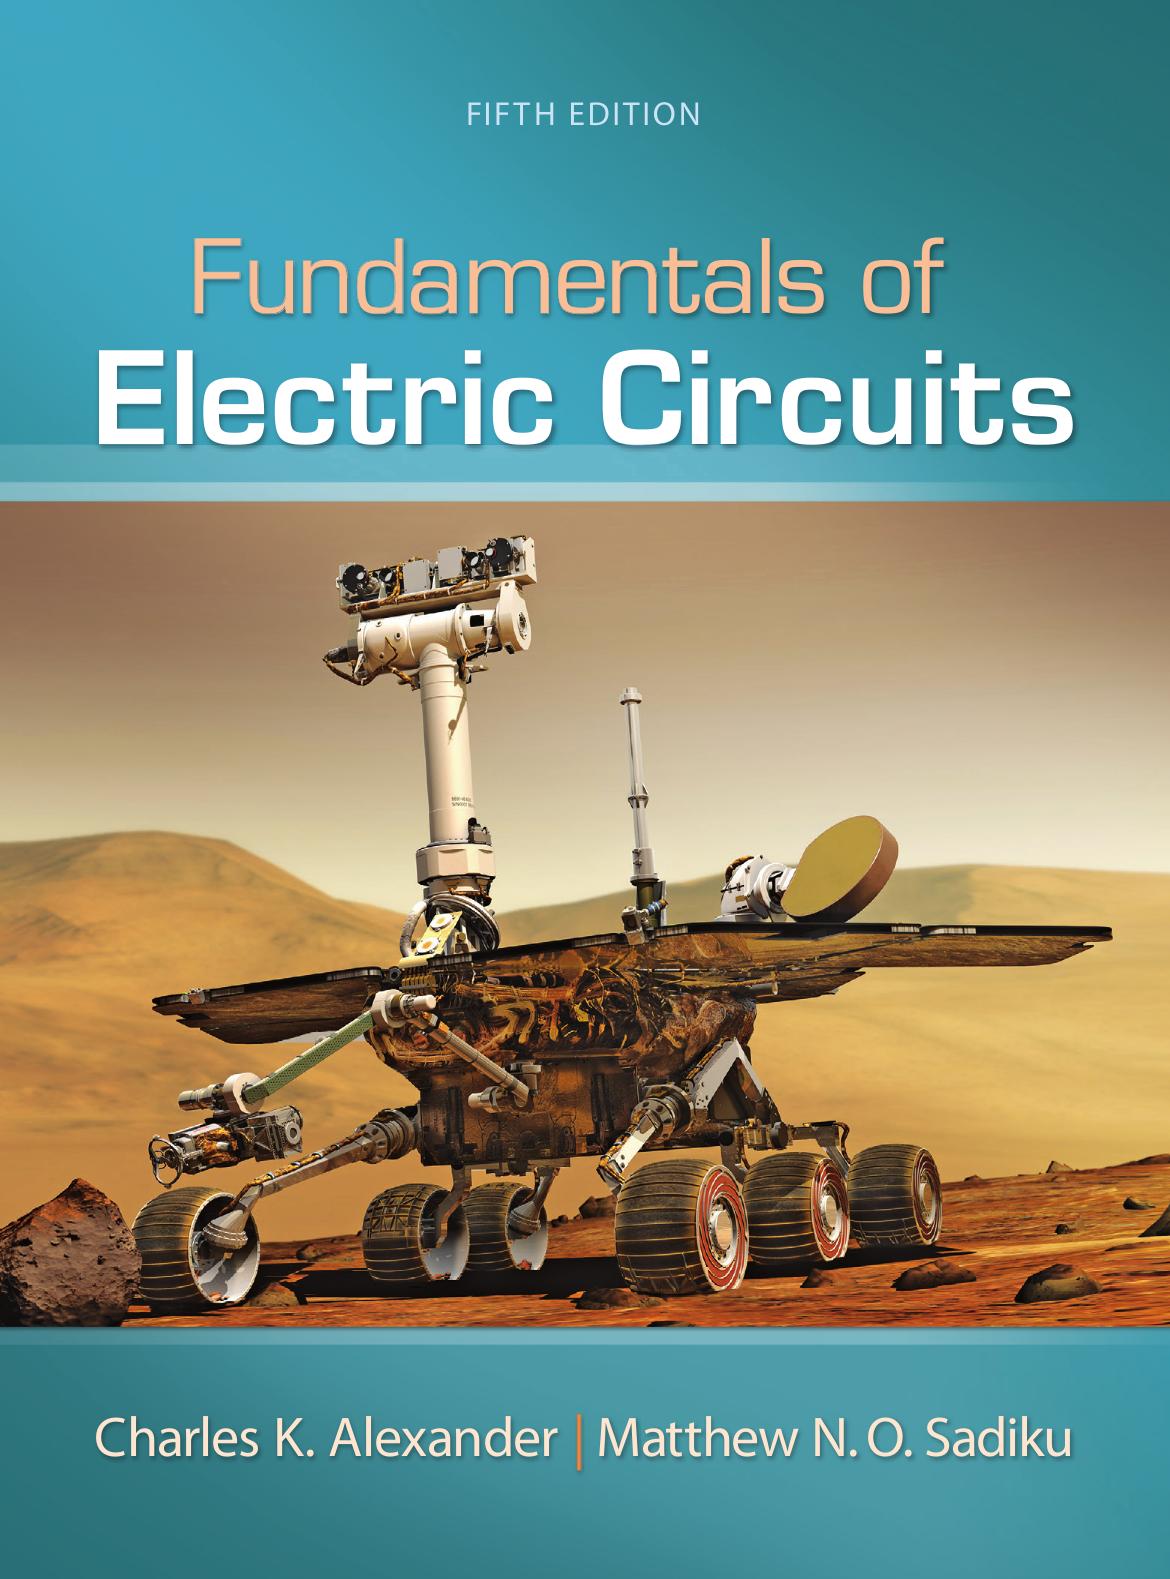 Fundamentals of Electric Circuits 5th Edition 2013